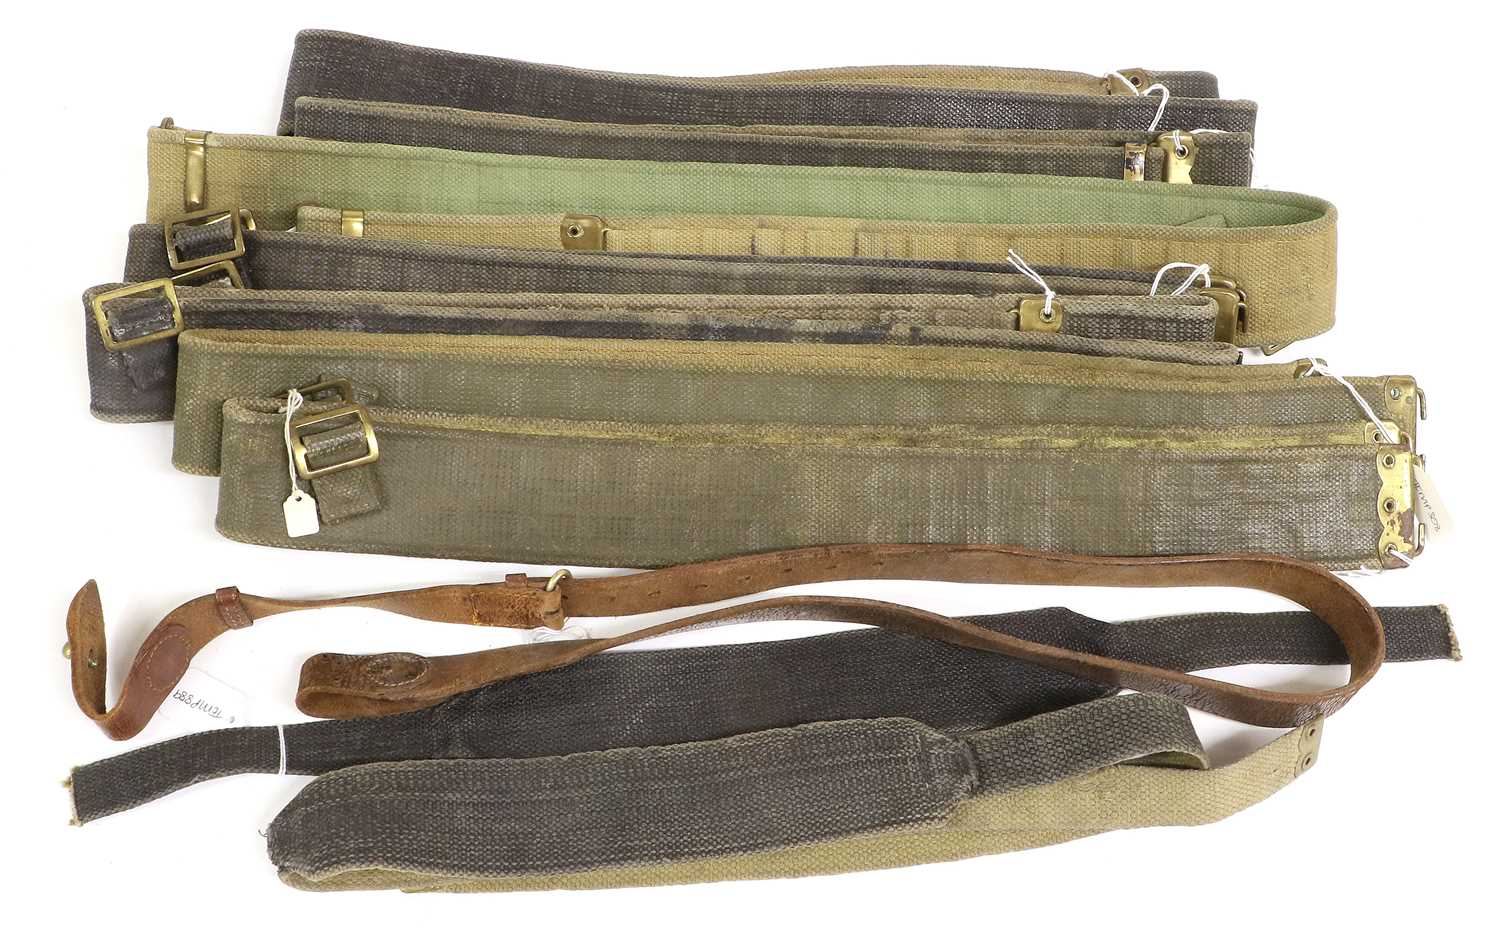 A Quantity of British Uniform Accessories, including Sam Browne belts, sword slings, leather straps, - Image 4 of 11